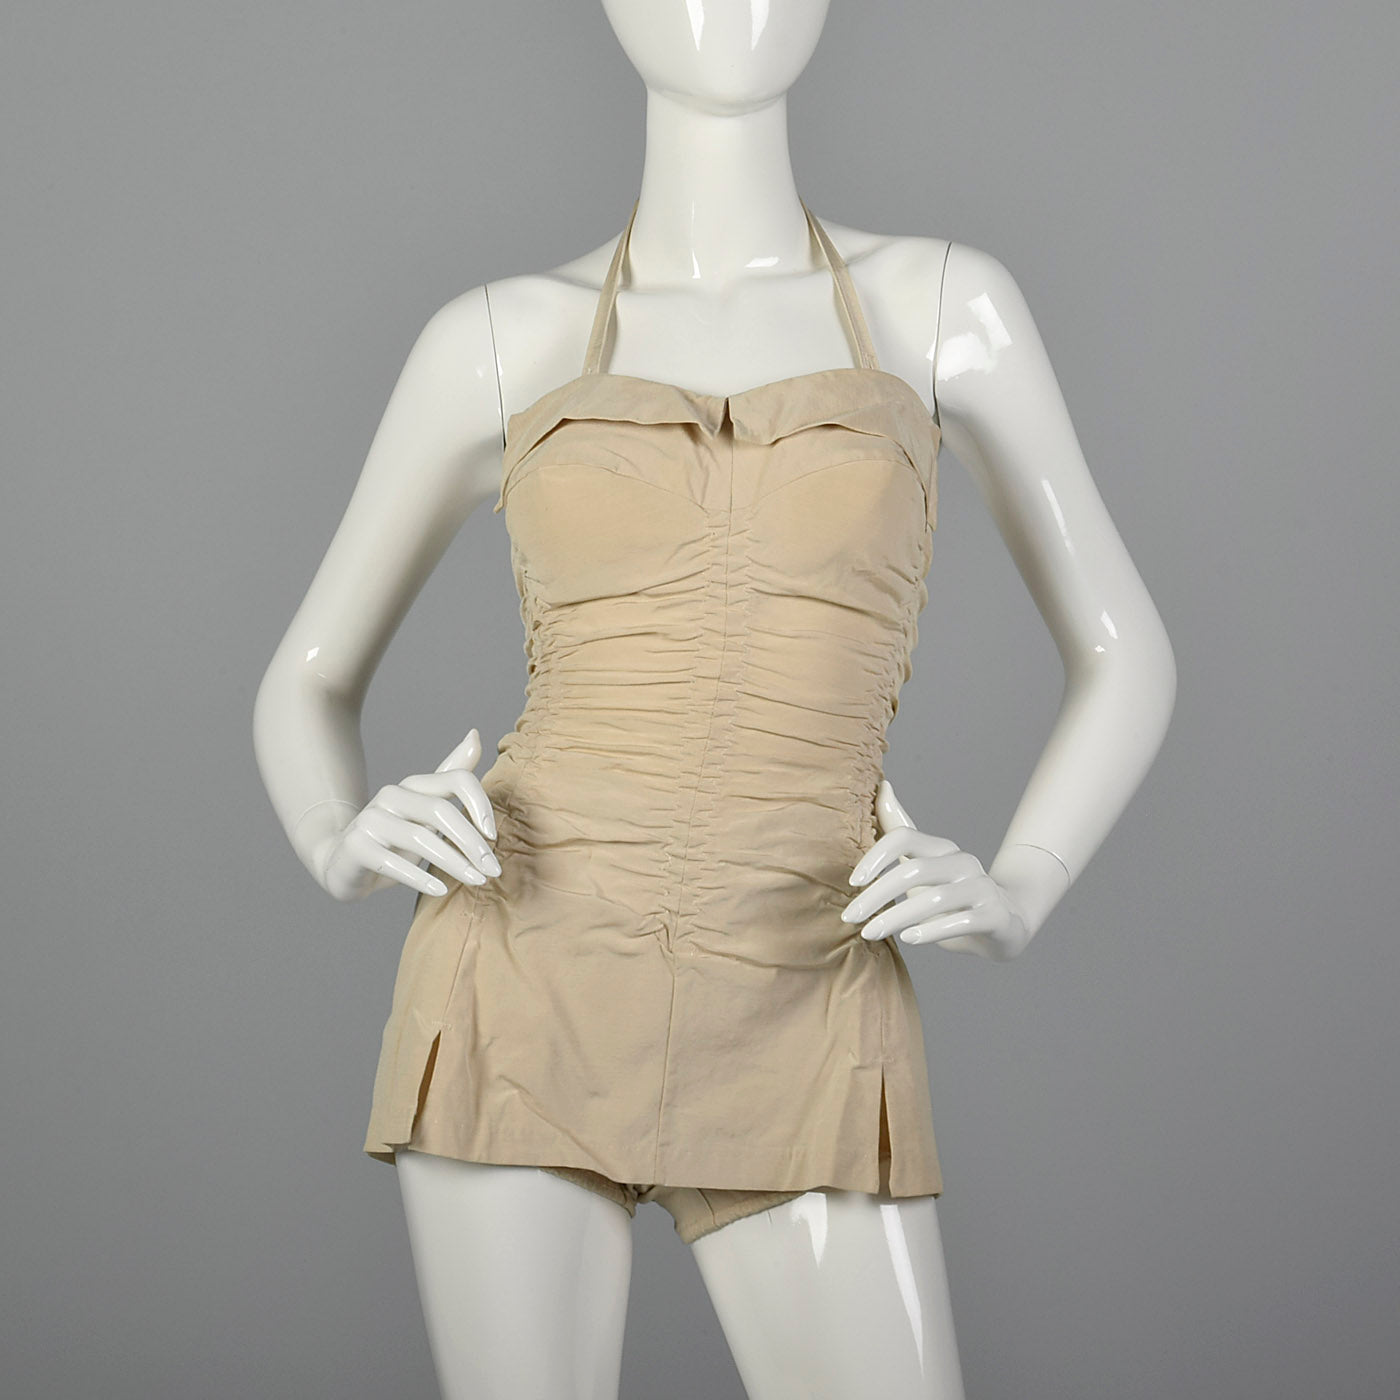 1950s Pin Up Halter Swimsuit